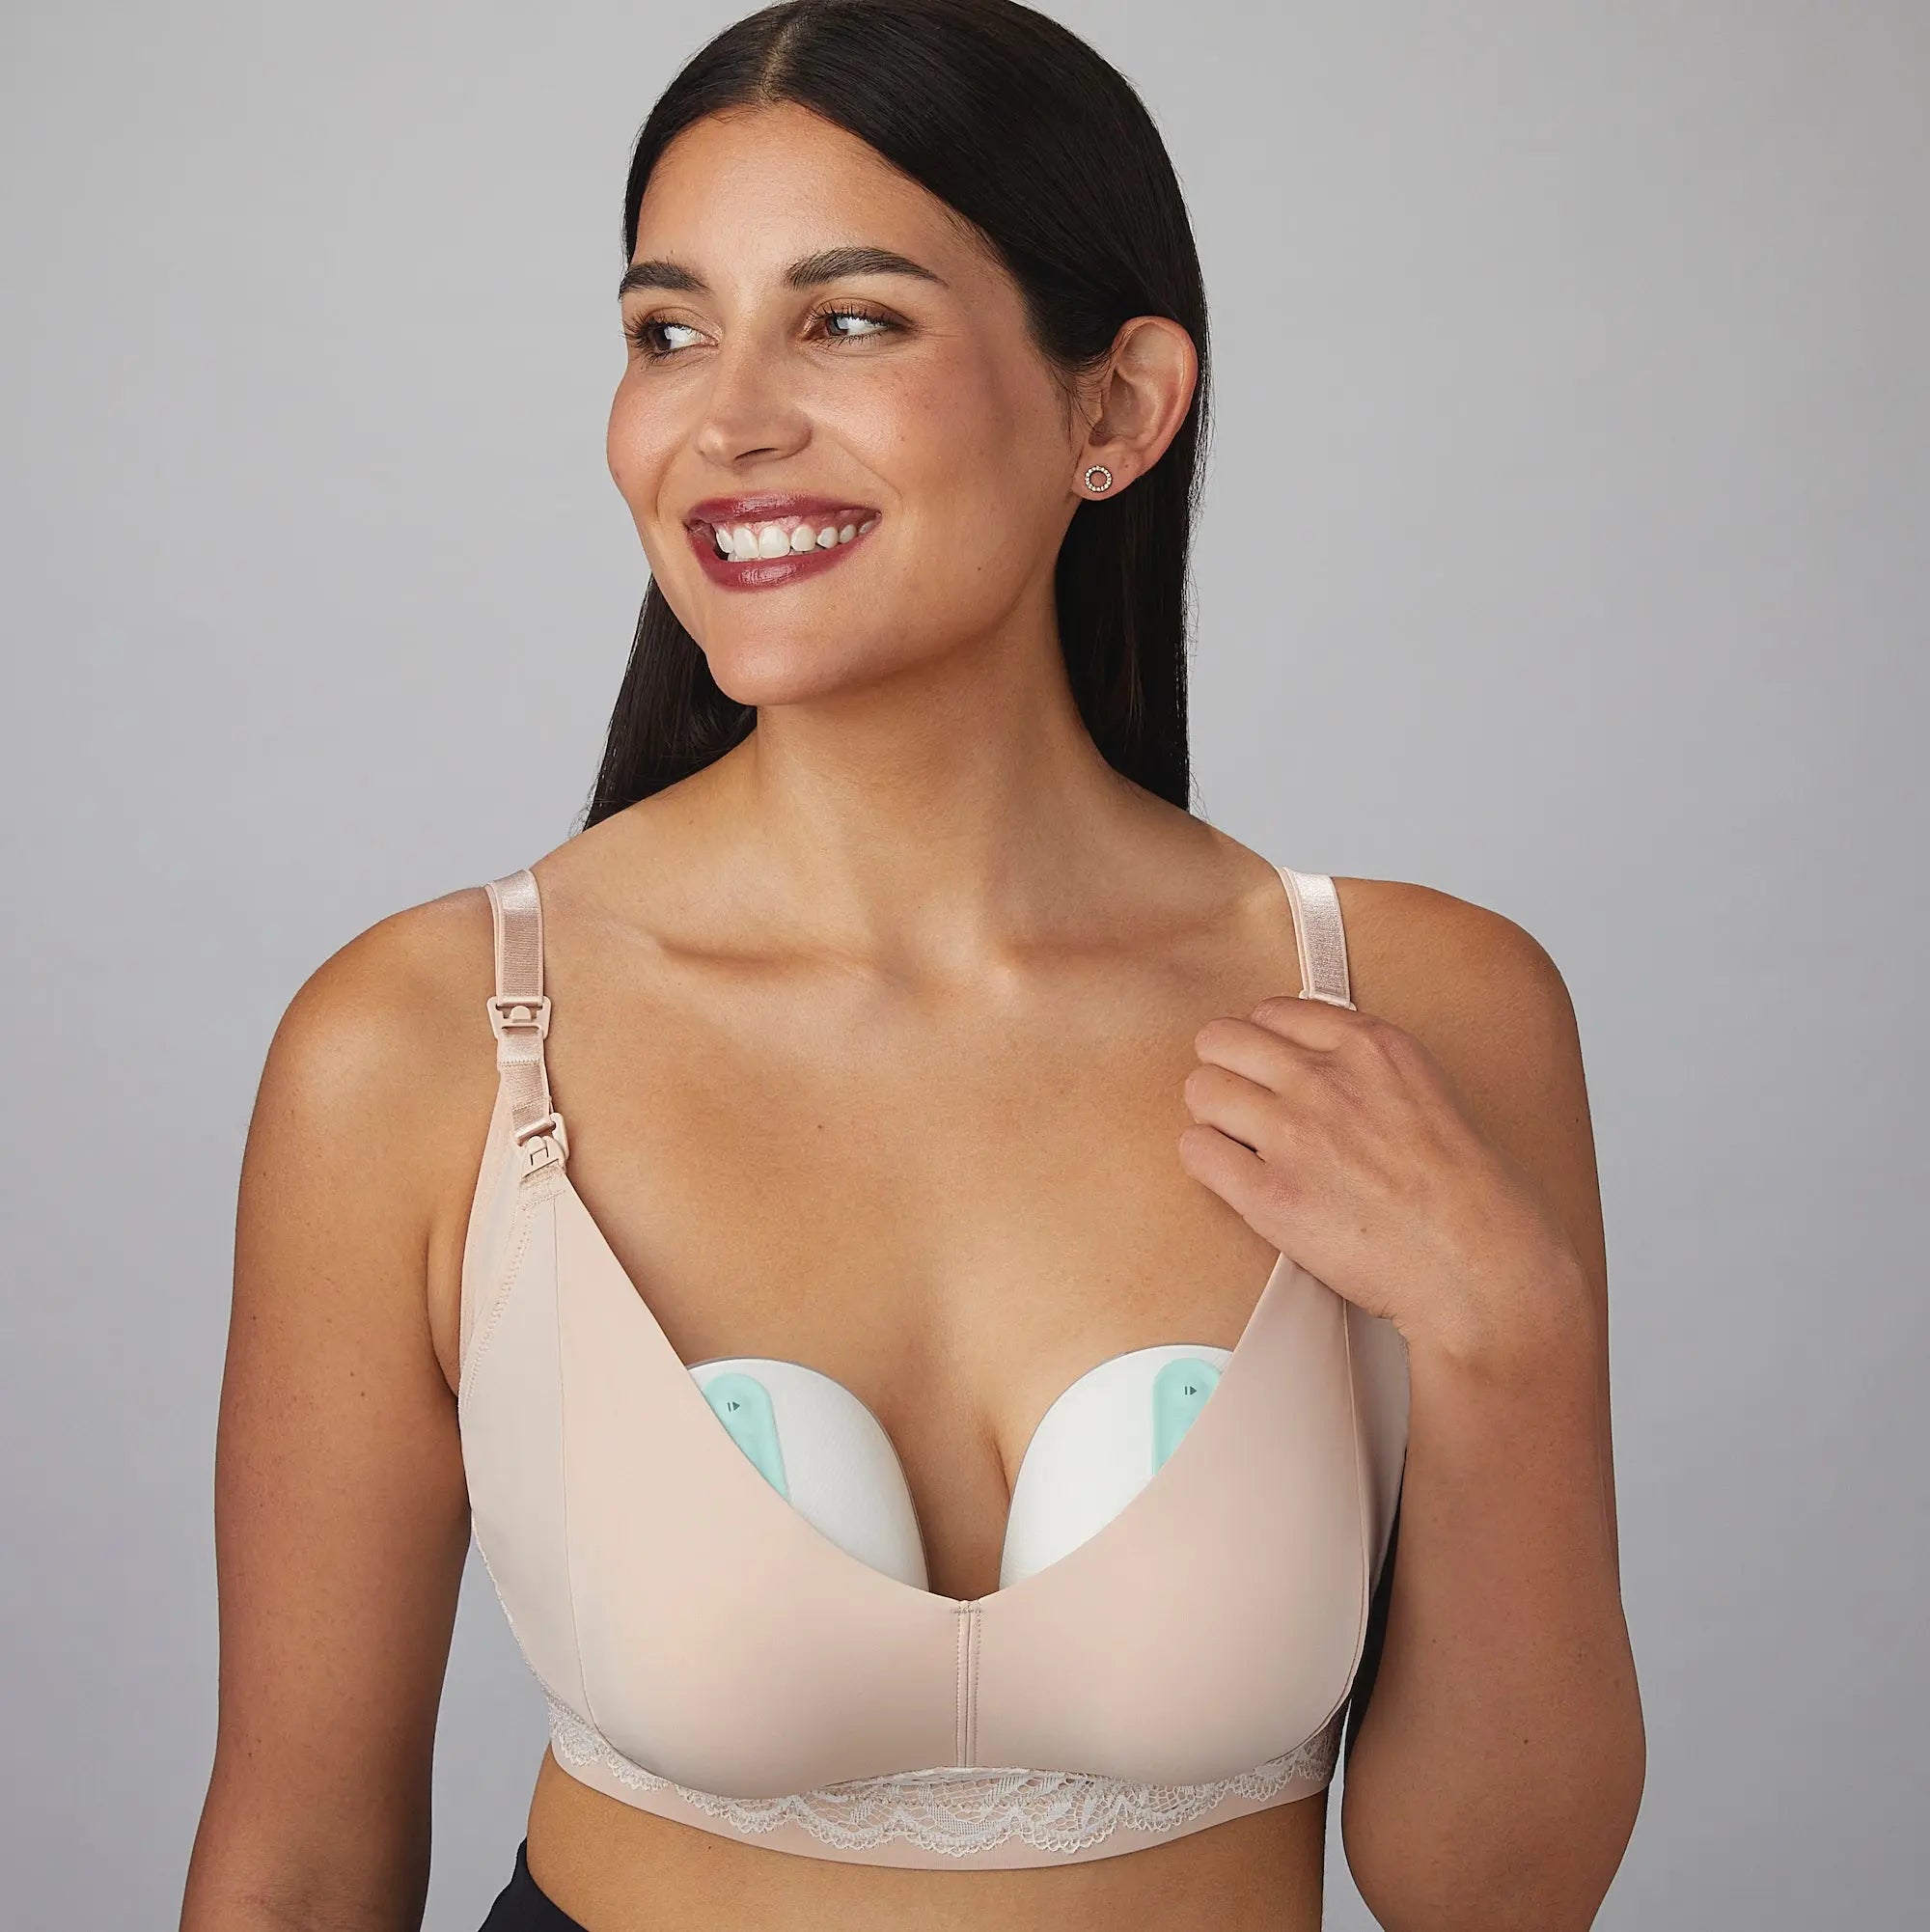 The Luxe Pumping Bra By The Dairy Fairy